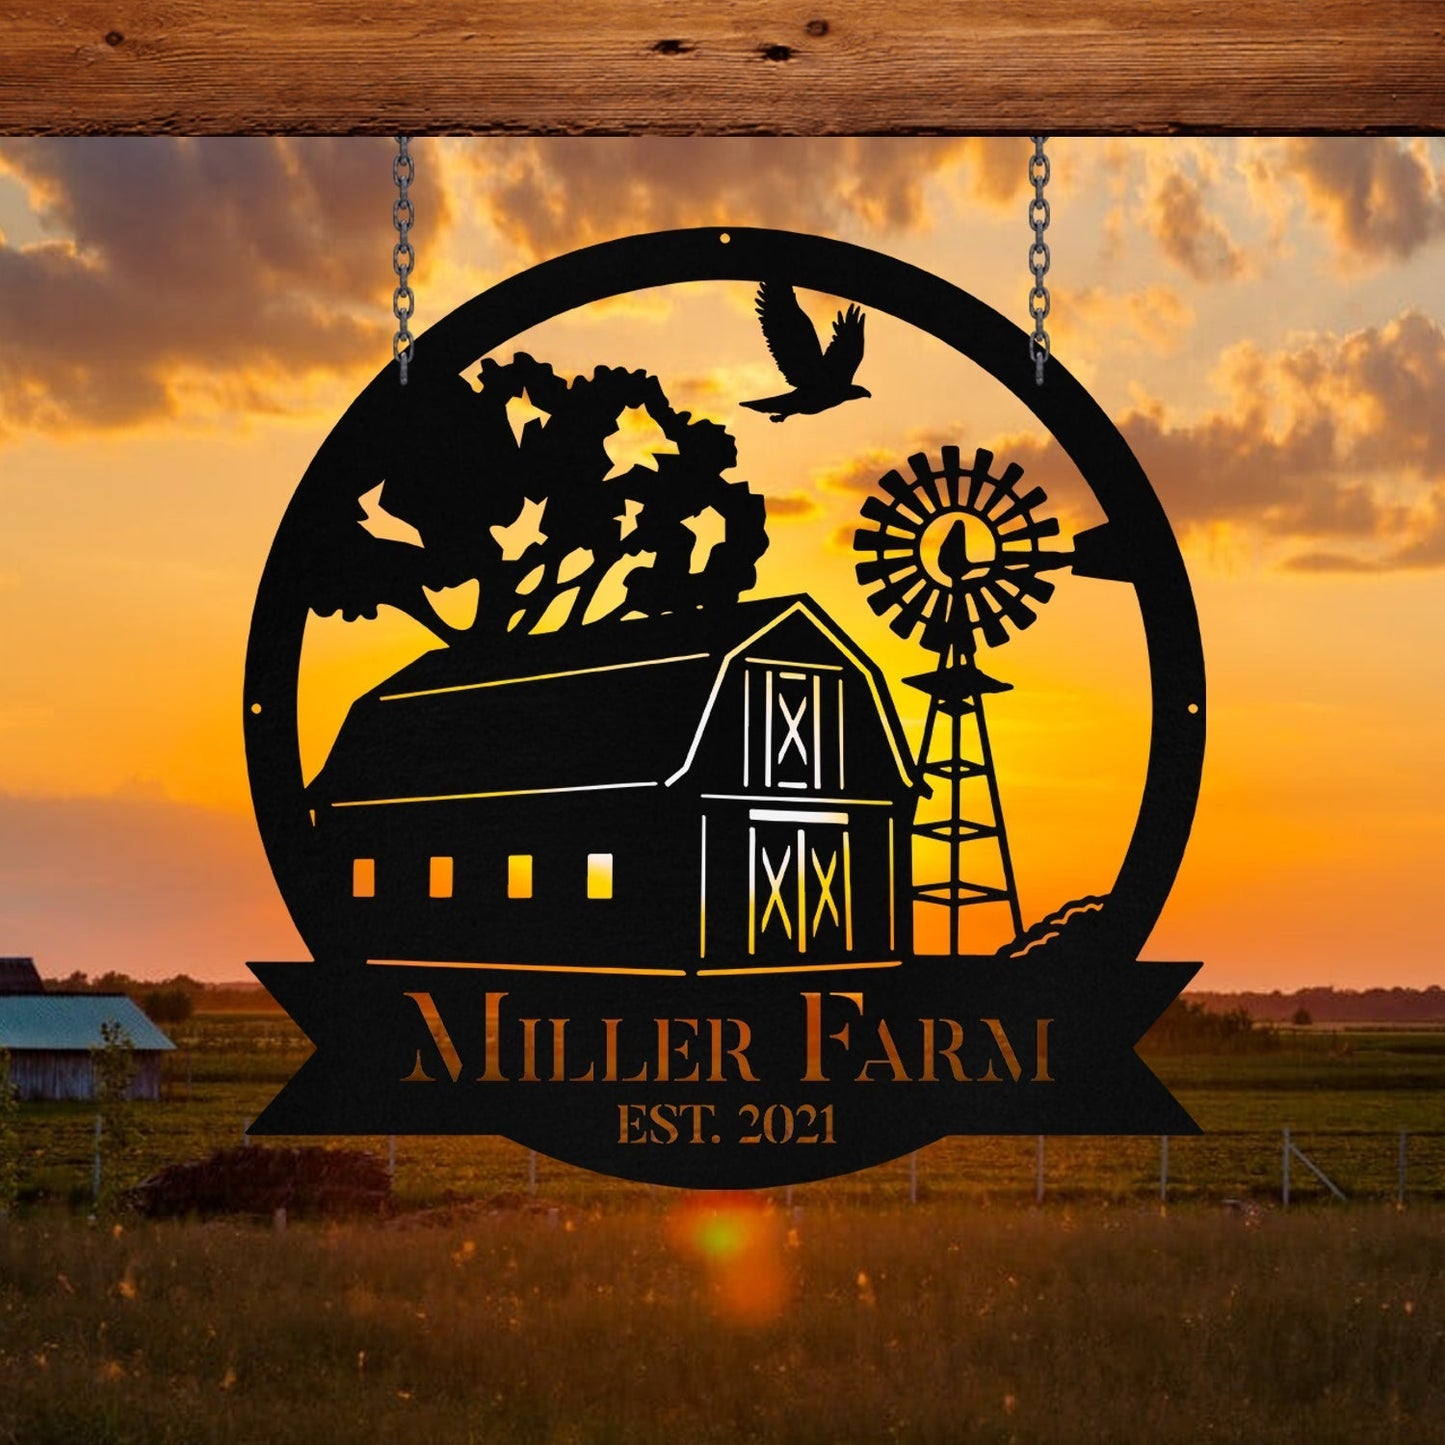 Personalized Metal Farm Sign Barn Windmill Monogram Custom Outdoor Farmhouse Front Gate Entry Road Wall Decor Art Gift